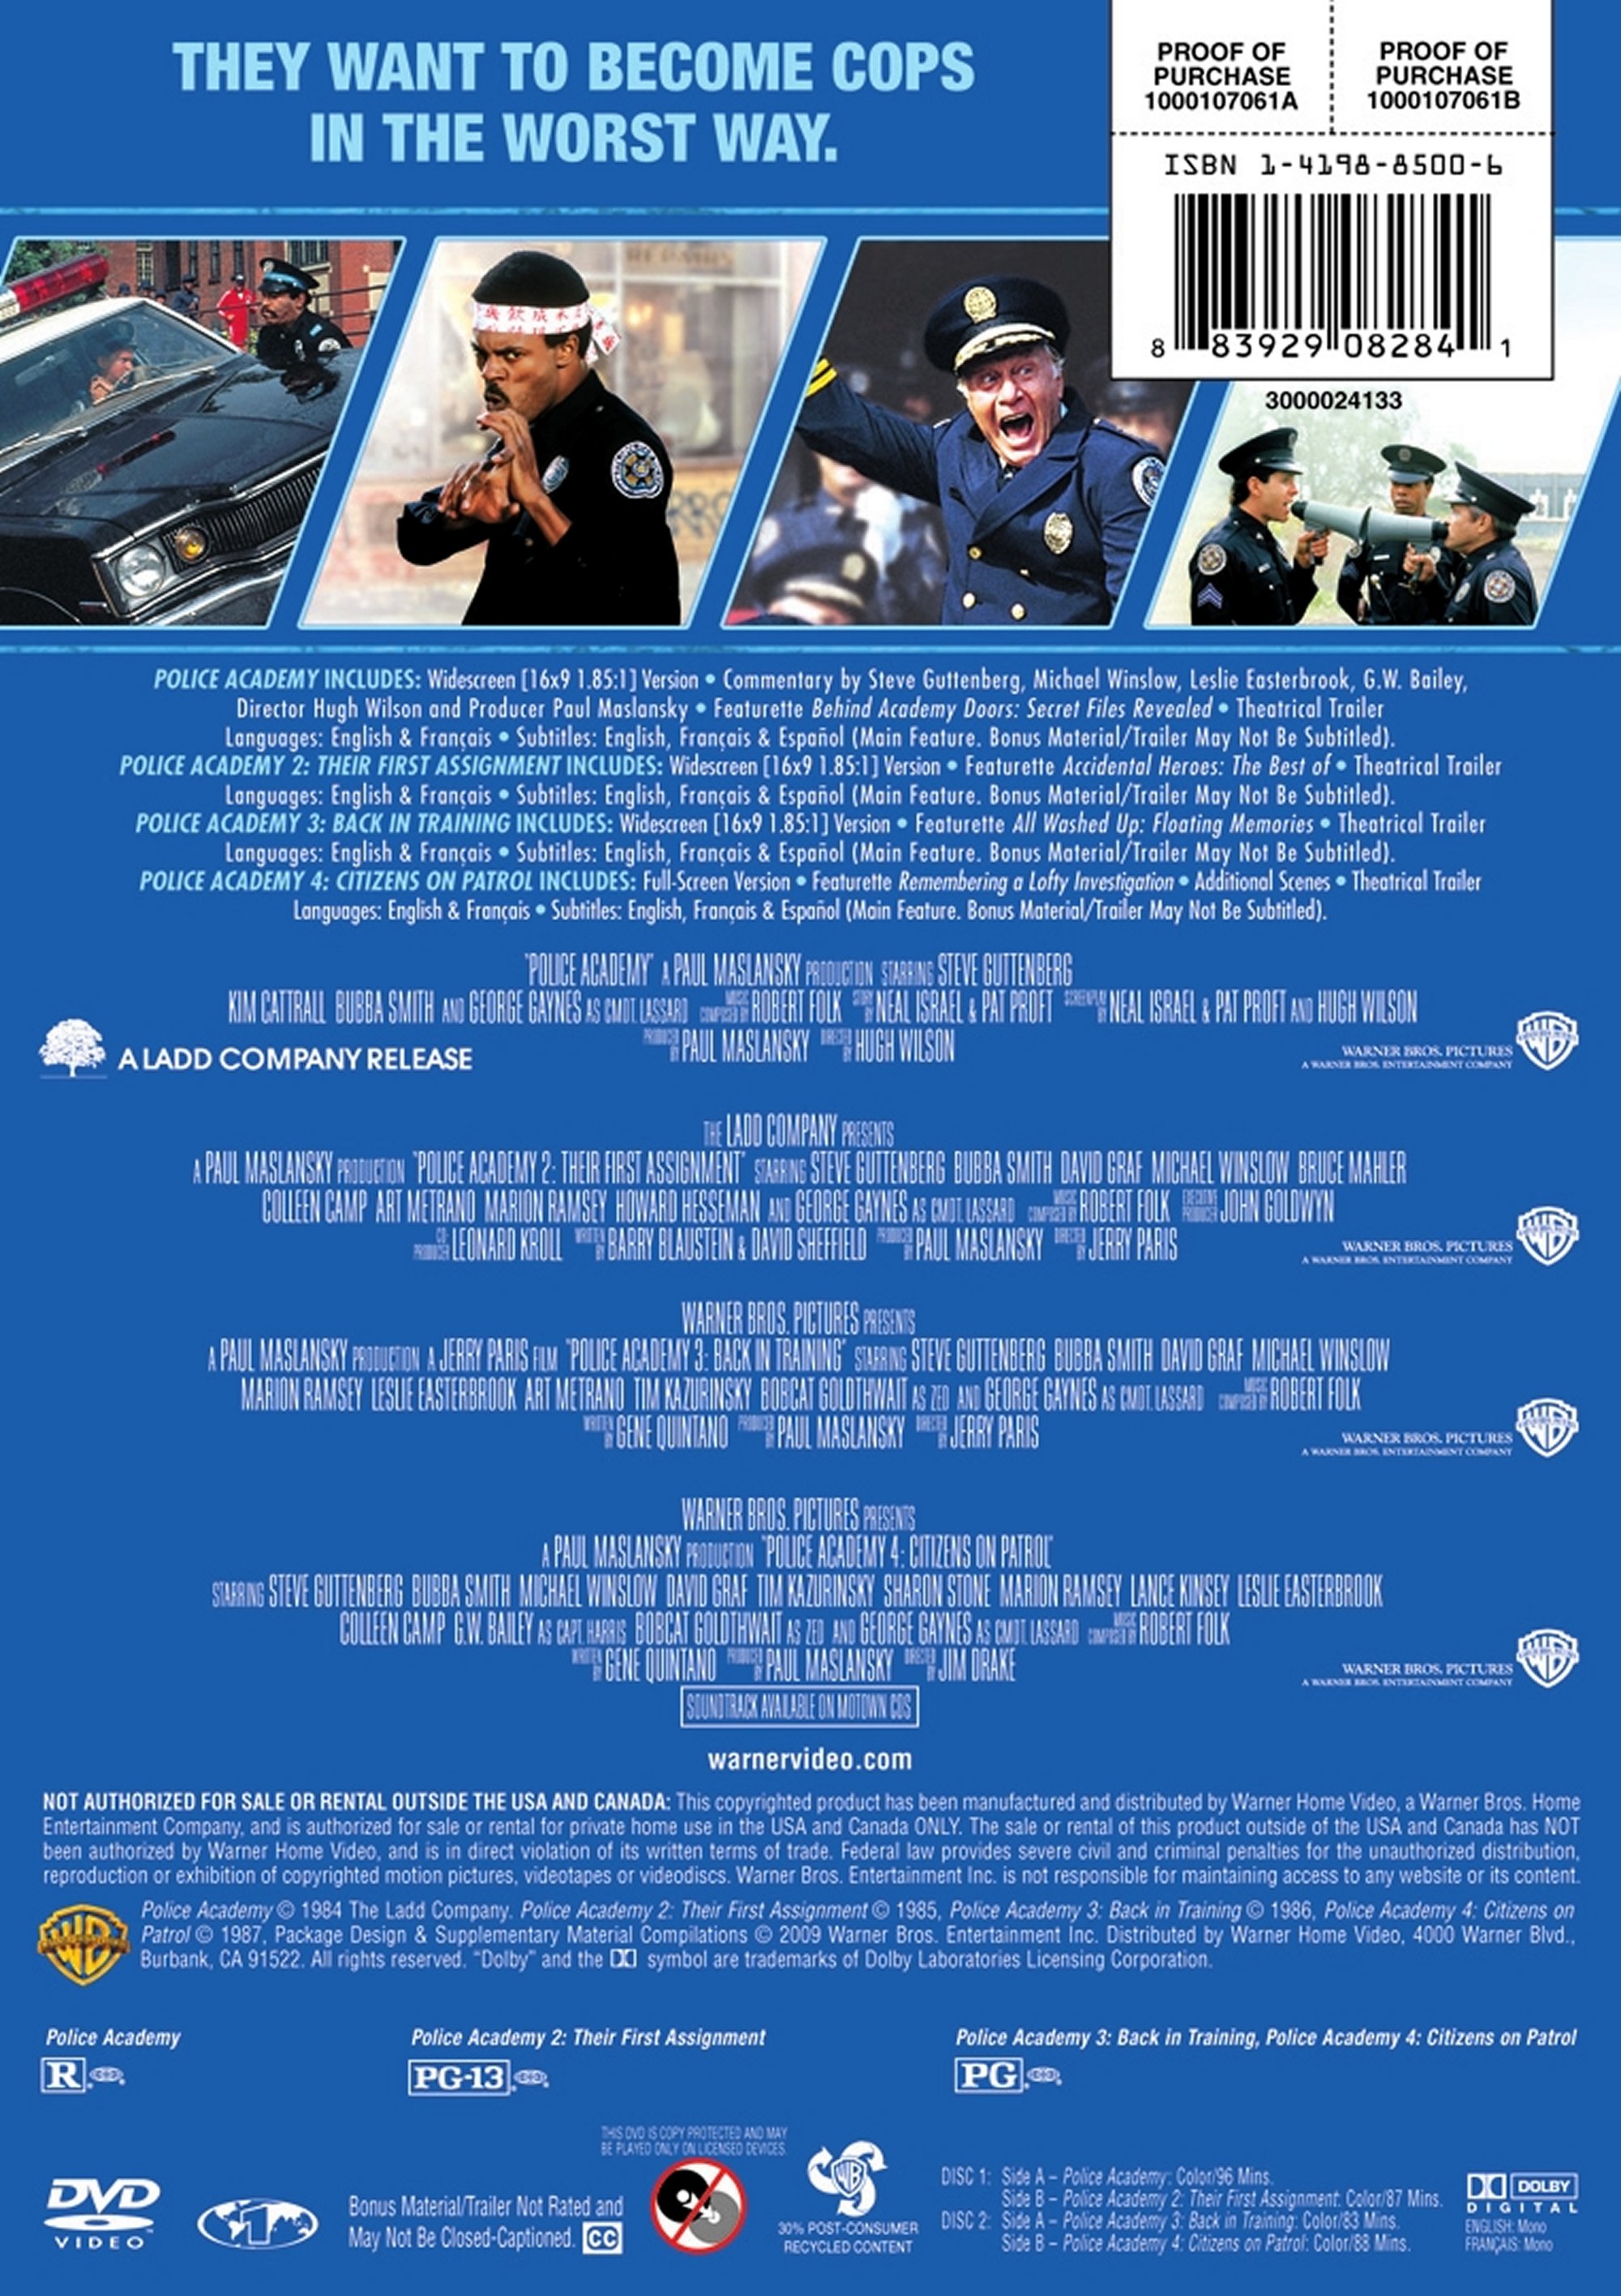 4 Film Favorites: Police Academy 1-4 Collection (DVD), Warner Home Video, Comedy - image 2 of 2